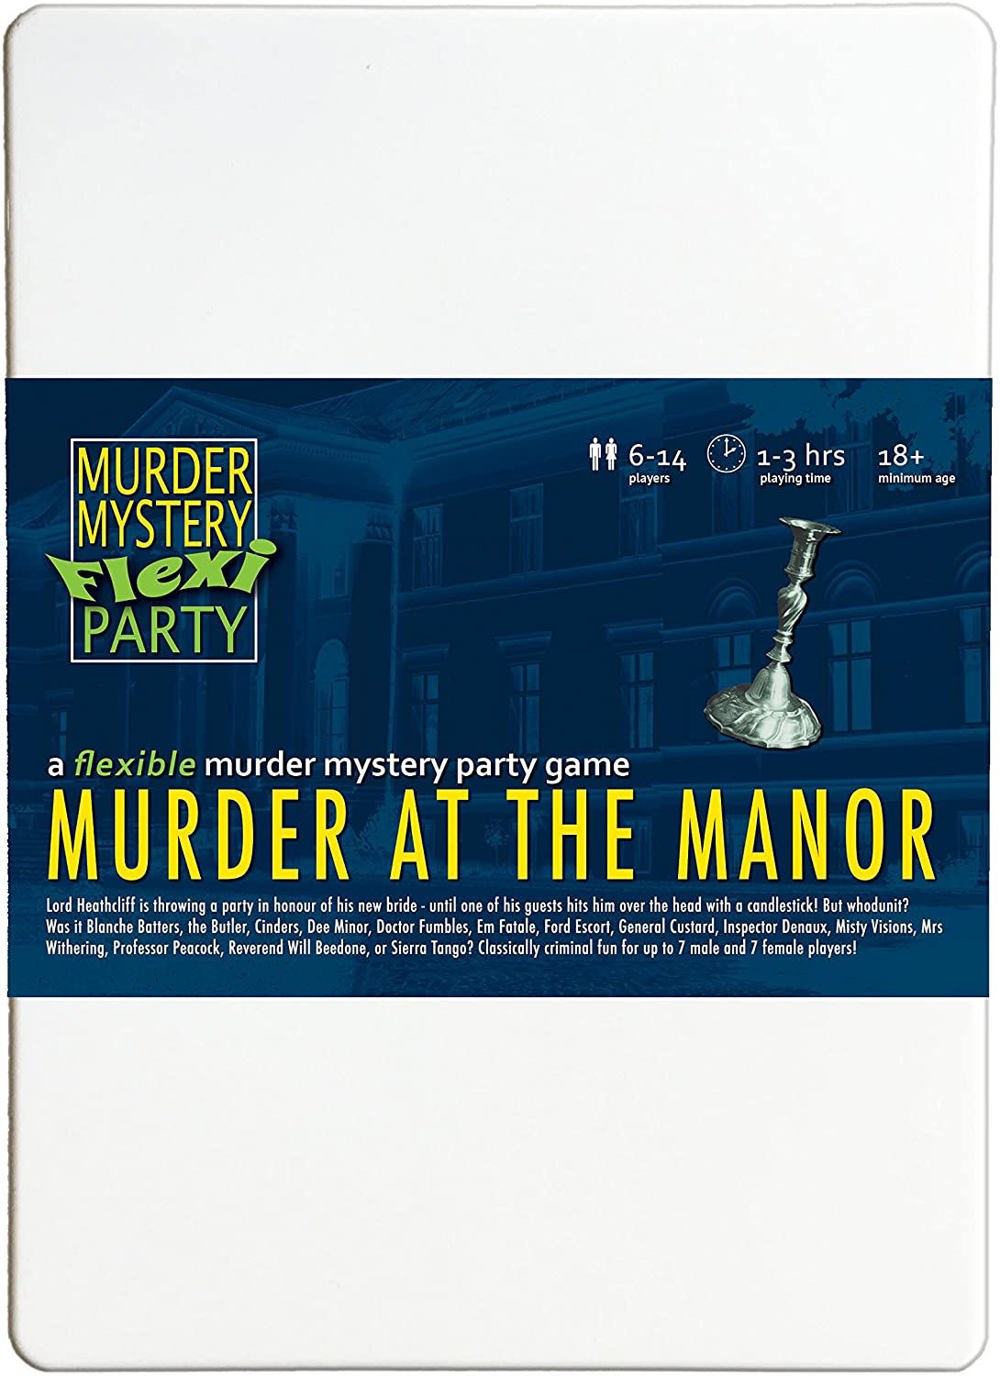 Murder at the Manor: 6-14 Player Murder Mystery Flexi-Party